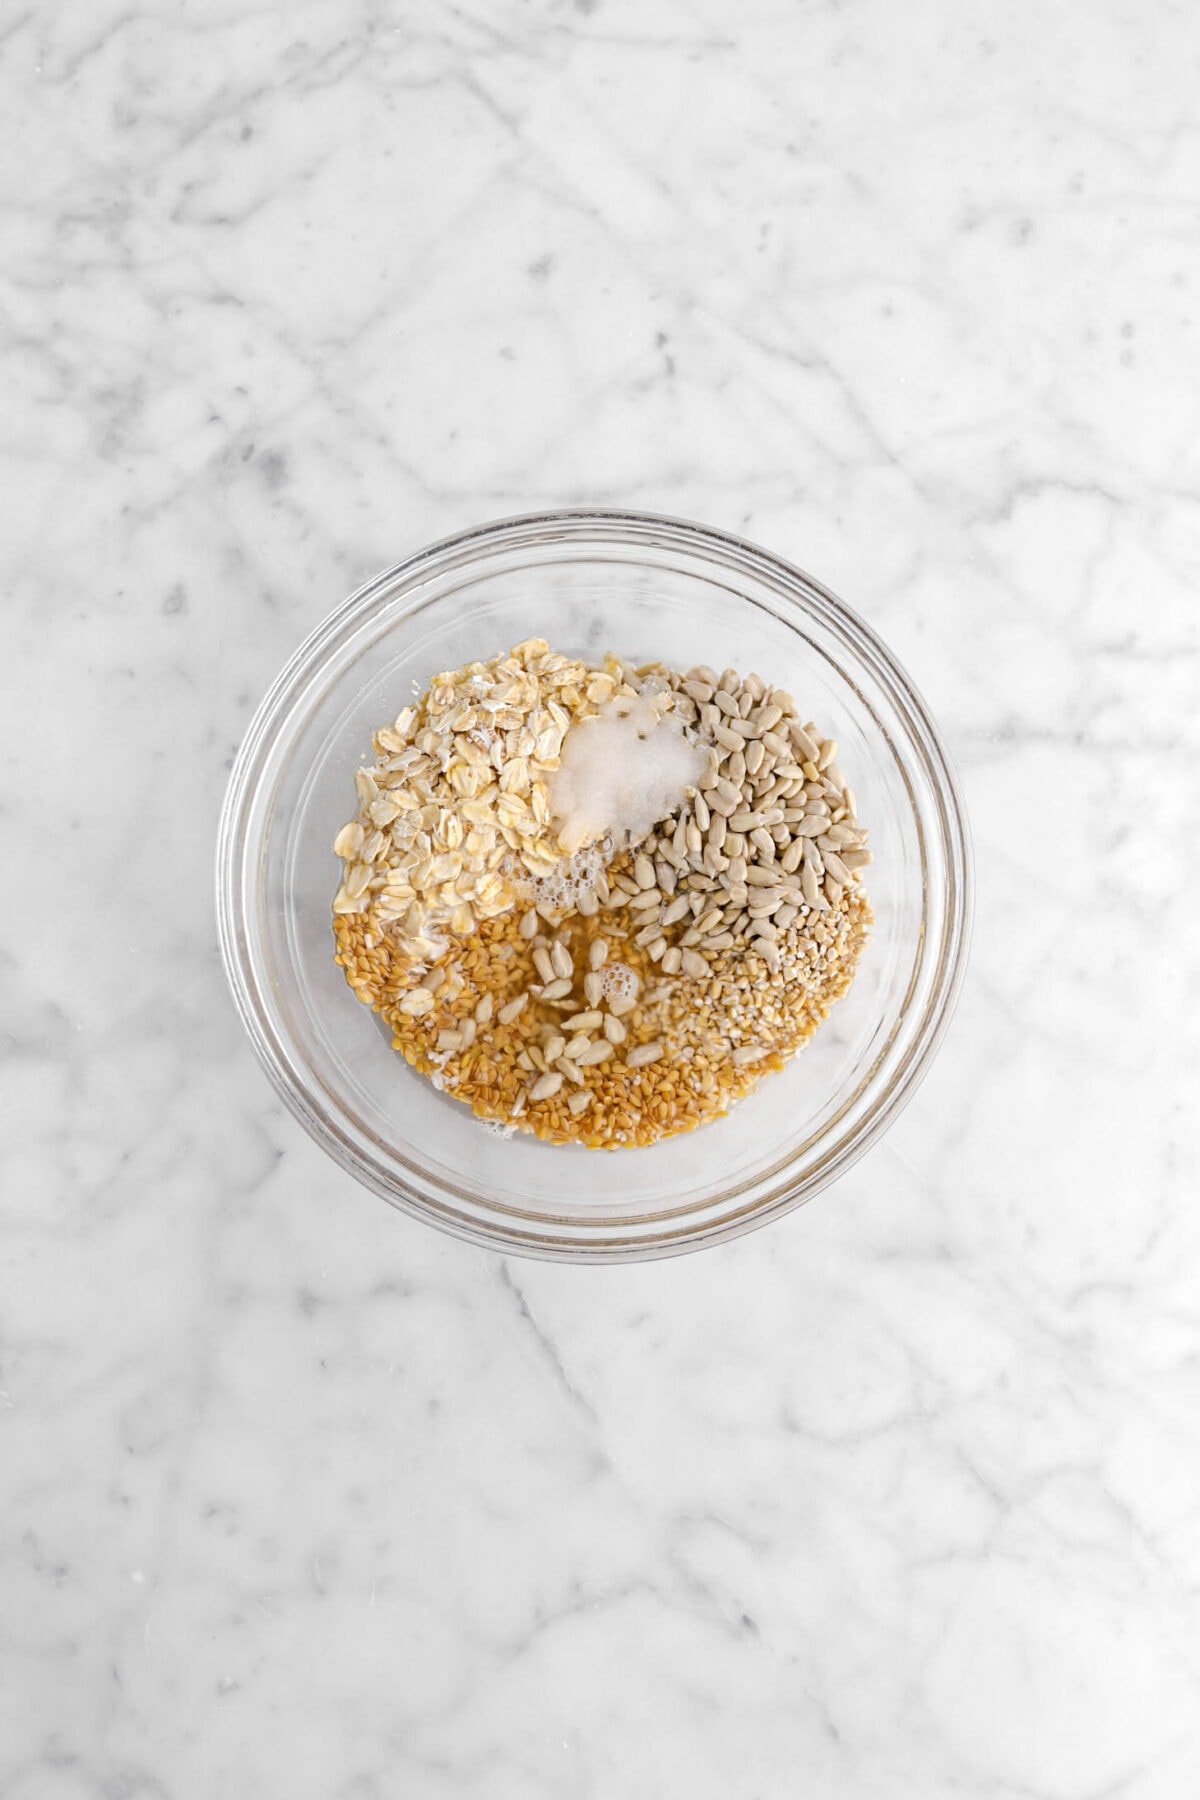 oats, salt, flaxseeds, sunflower seeds, and water in glass bowl